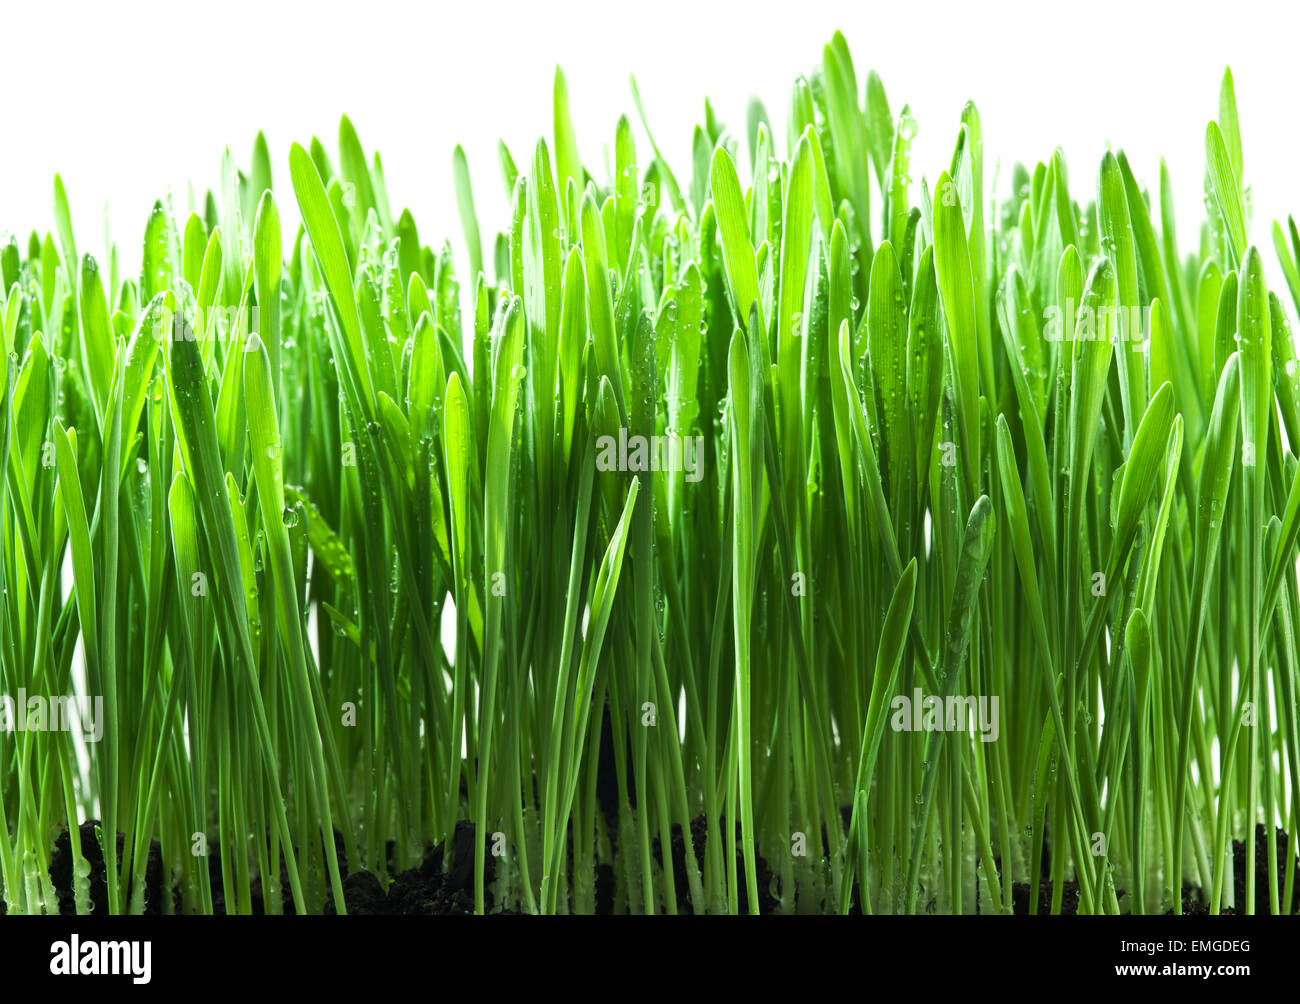 Green grass isolated on a white background. Stock Photo